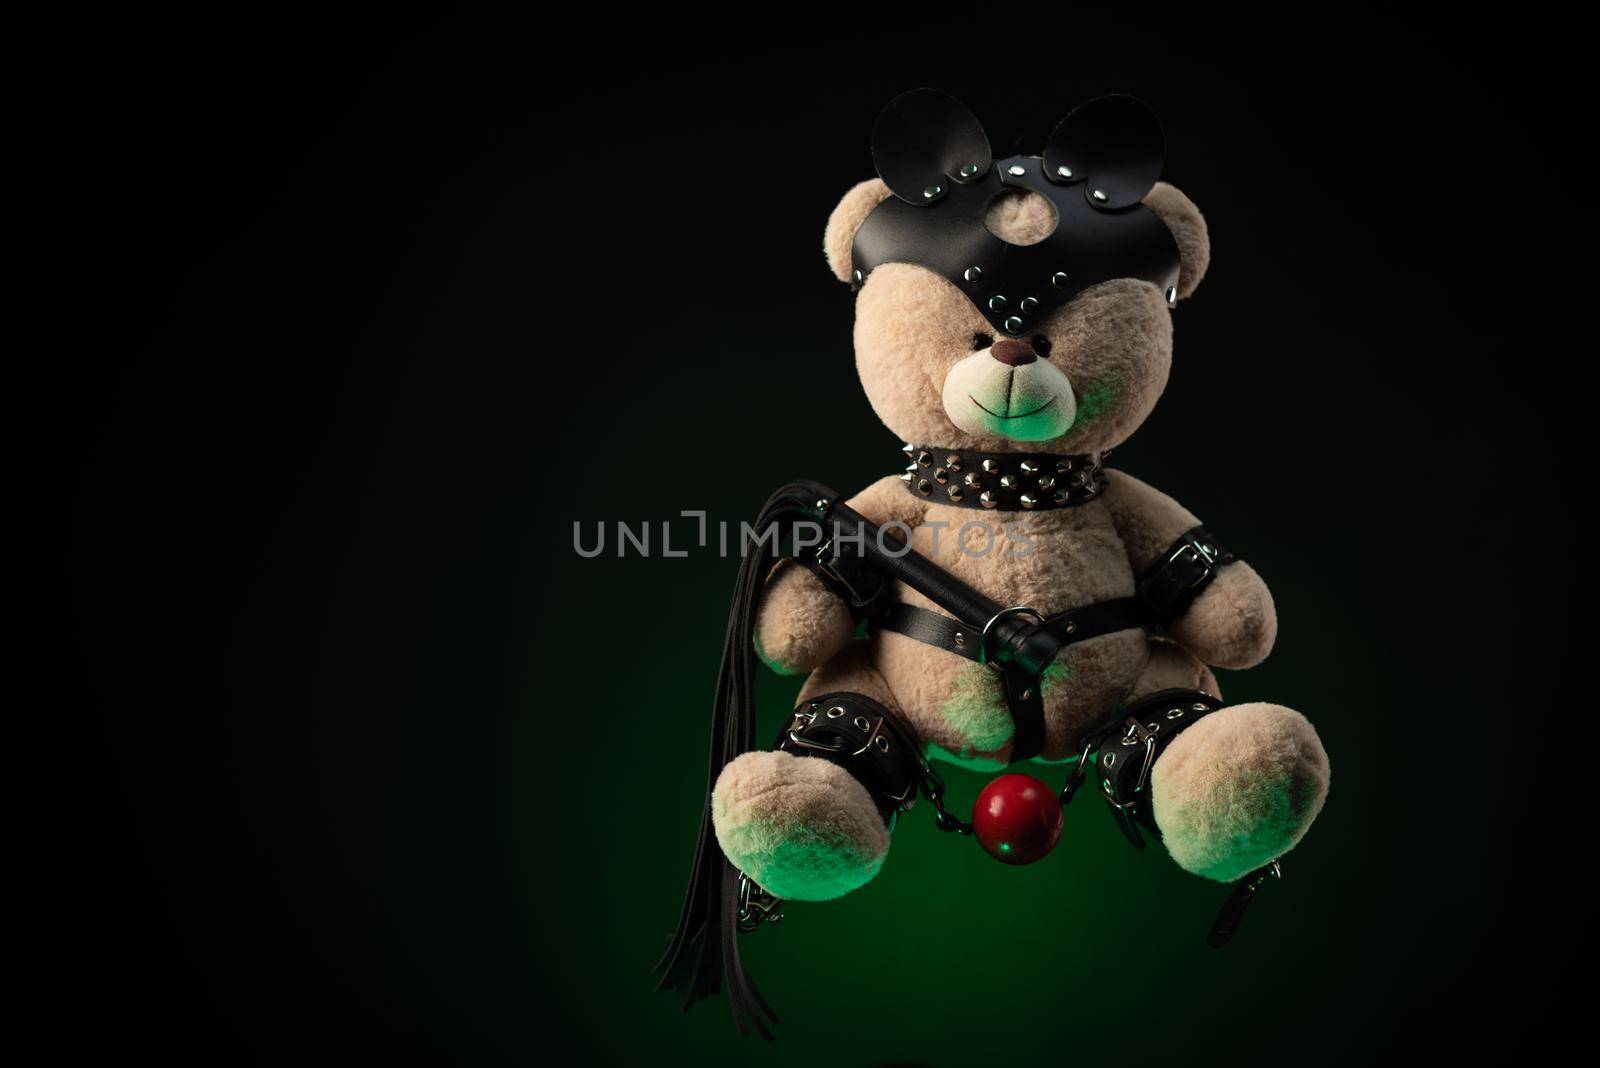 the toy Teddy bear dressed in leather belts and mask accessory for BDSM games